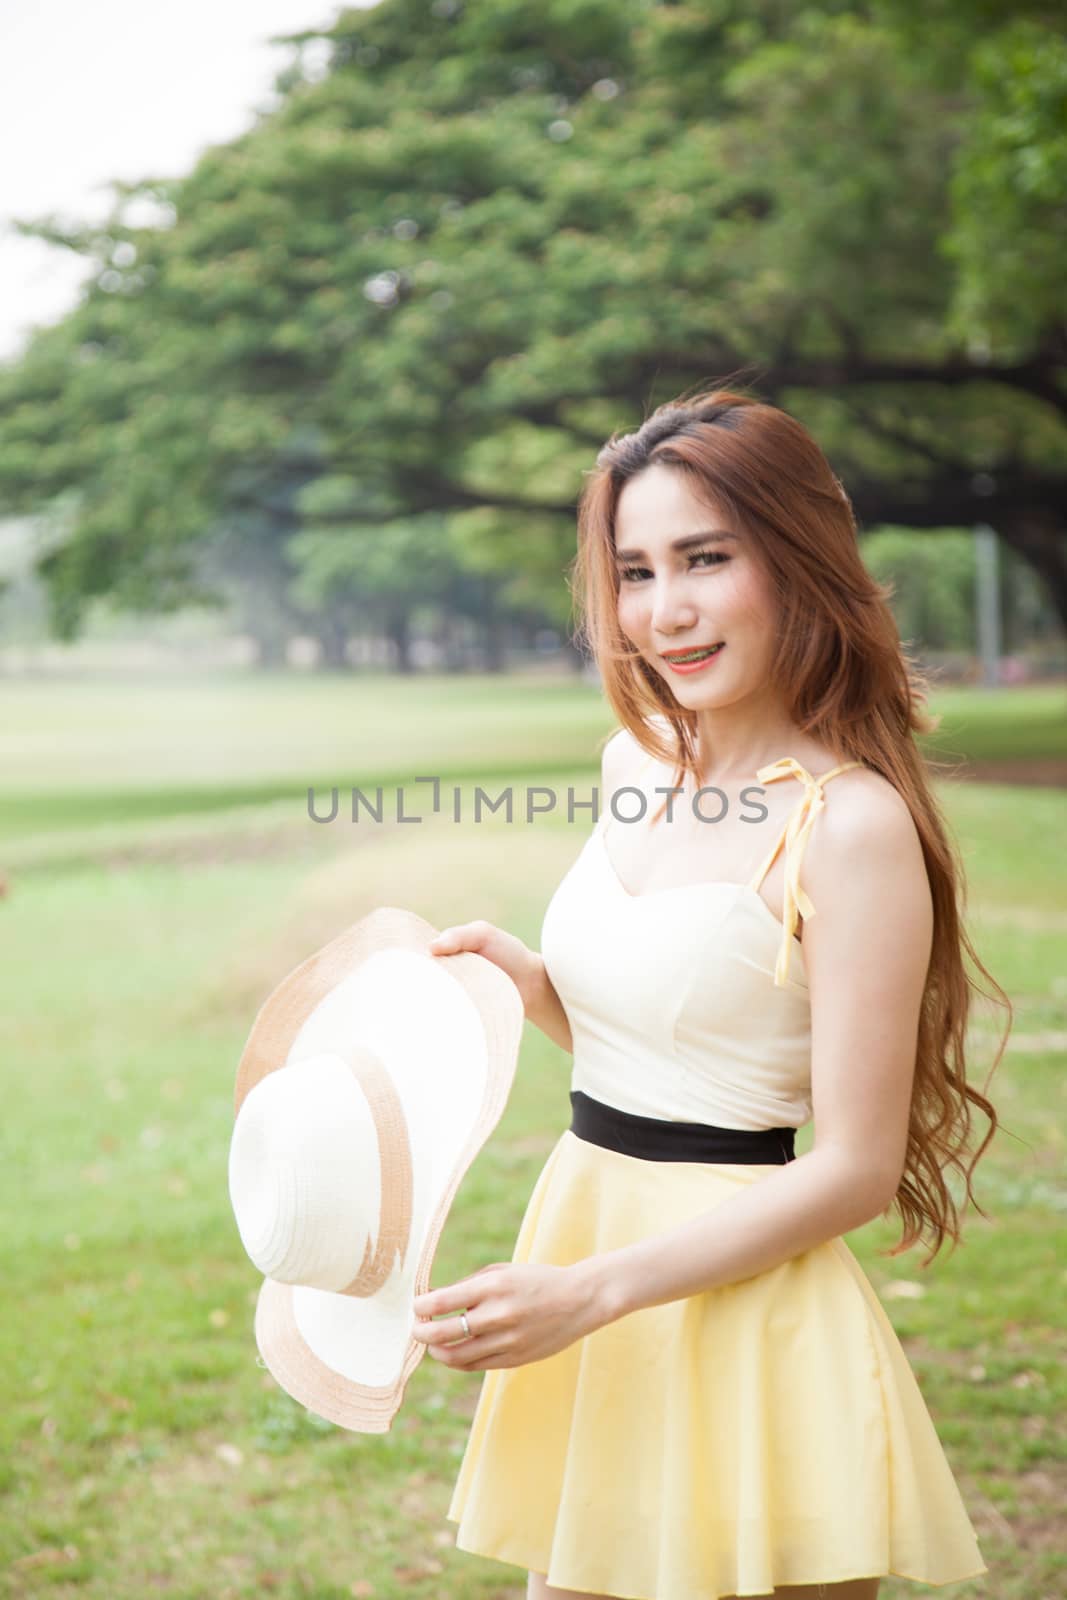 Woman holding a hat. Located at the lawn in the park.